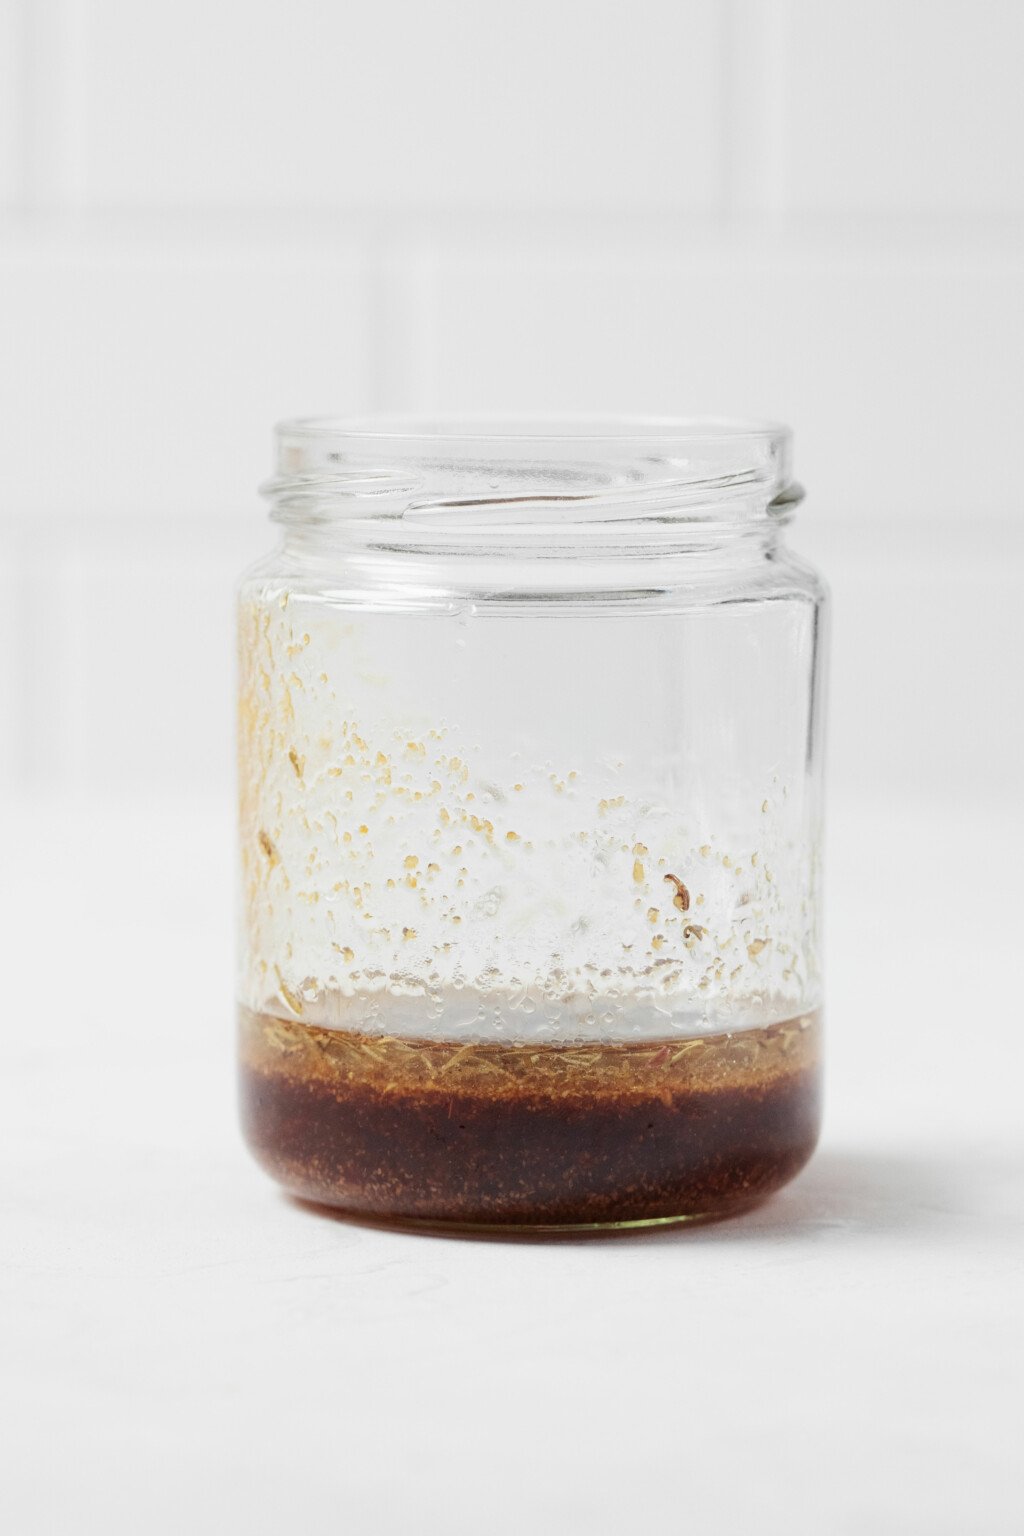 An image of a clear, glass jar, which is filled with a brown-colored marinade.